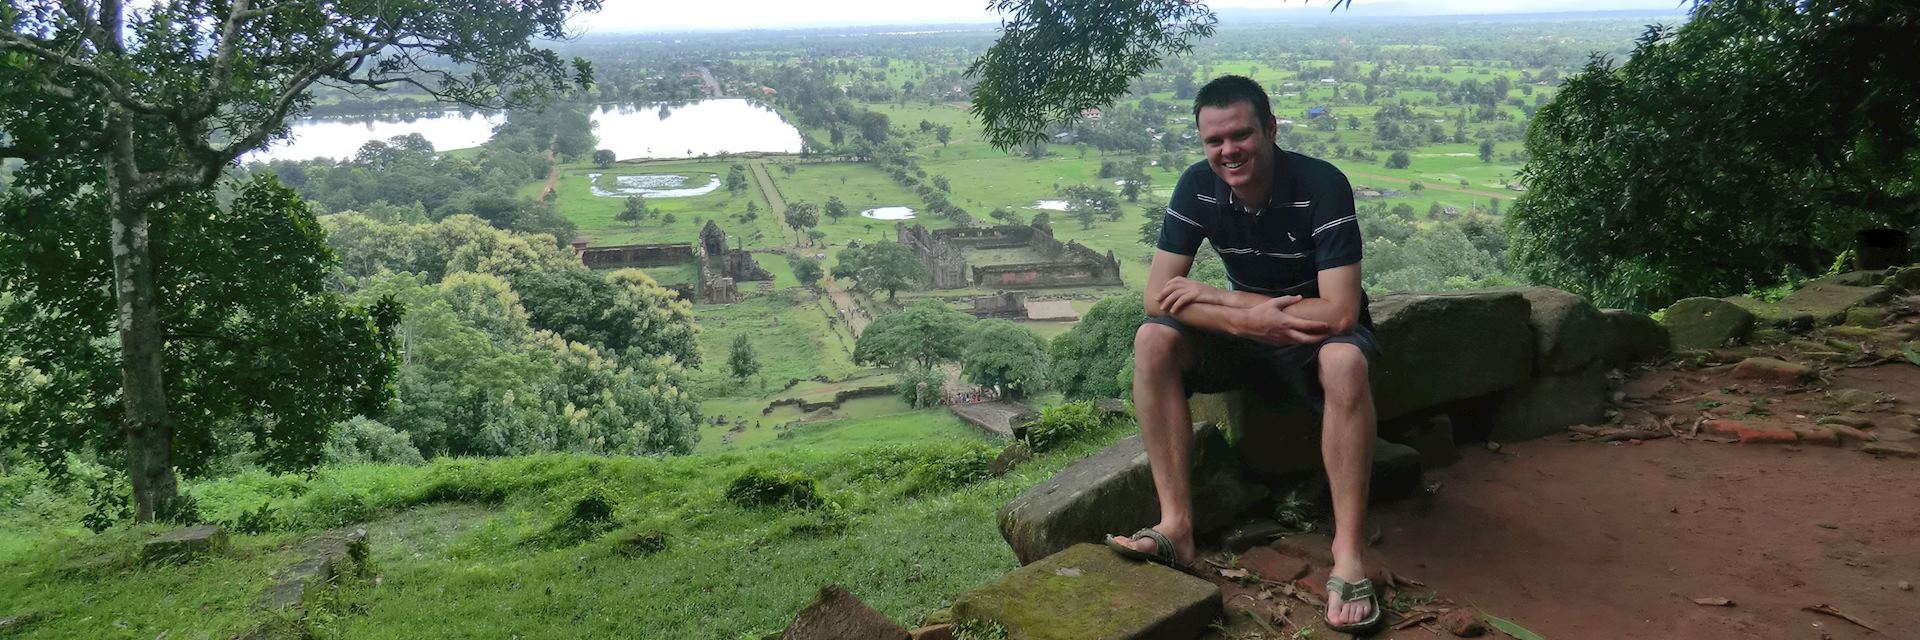 William and the panoramic view at Wat Phou in Southern Laos